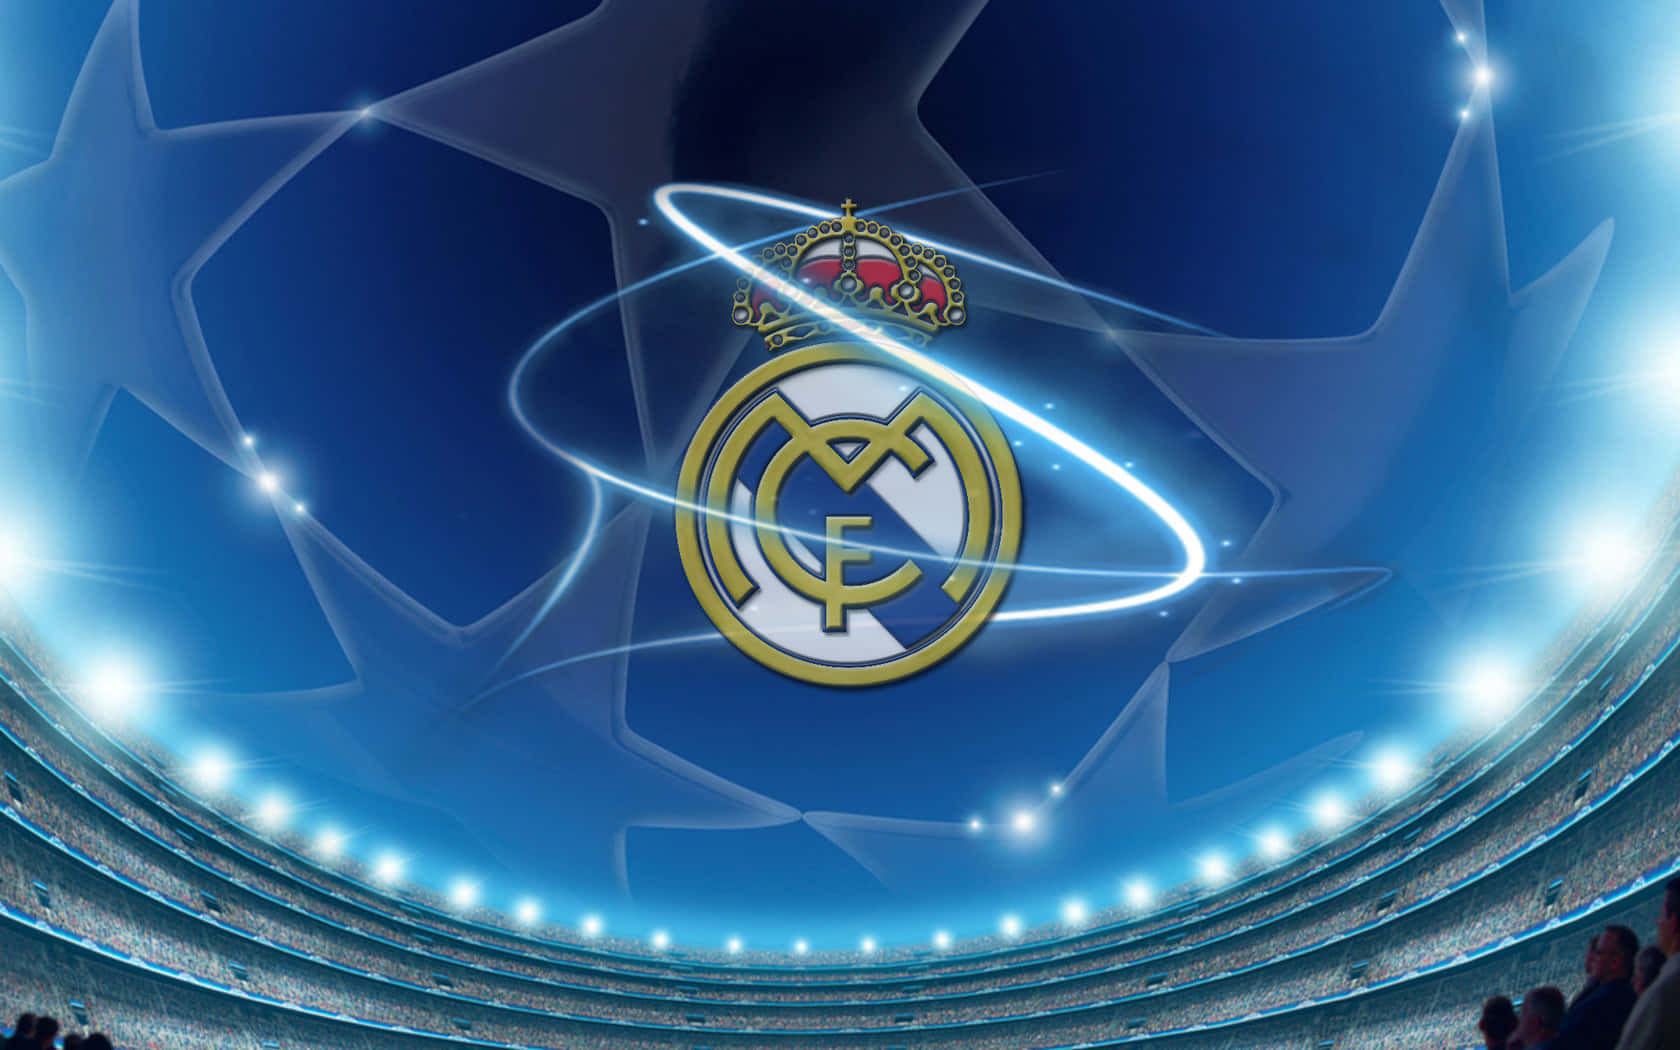 Experience the thrill of victory with Real Madrid